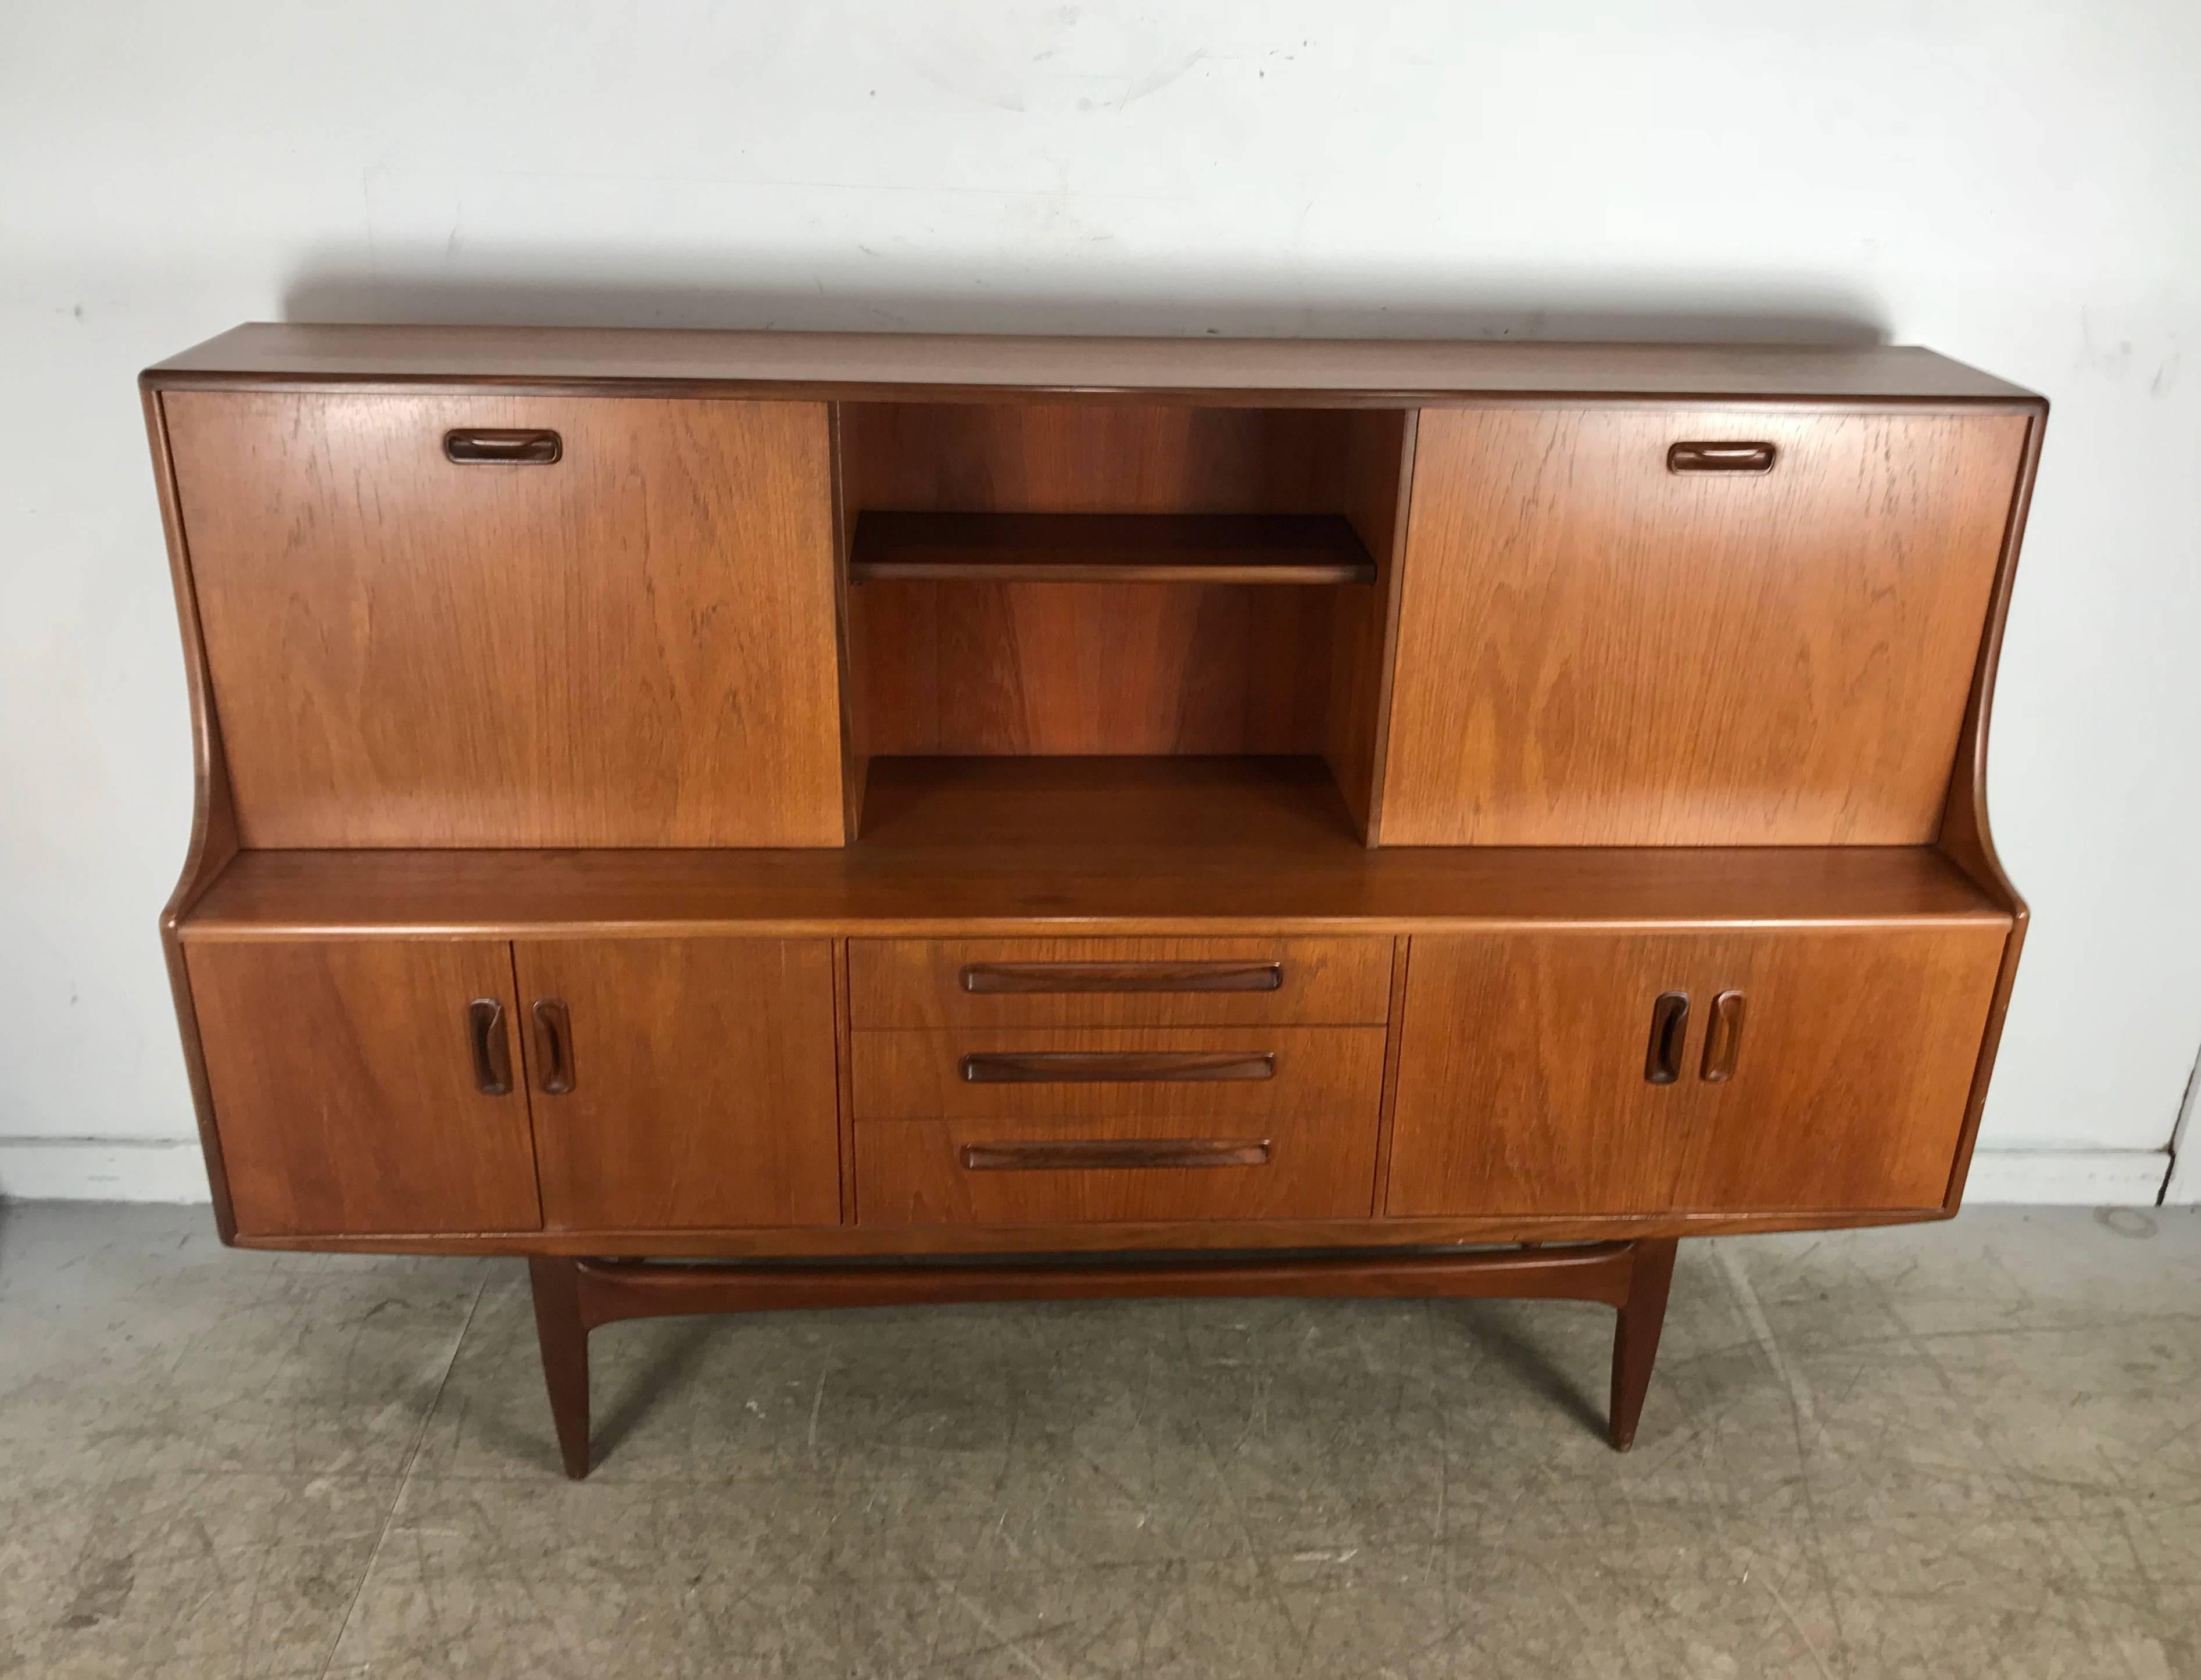 Classic teak Danish modern Credenza, cabinet by Ib-Kofod Larsen. Top featuring sliding door, drop down desk. Bar surface,Bottom left and right doors ,three drawers,top with flatware compartments, Superior quality and construction, hand delivery